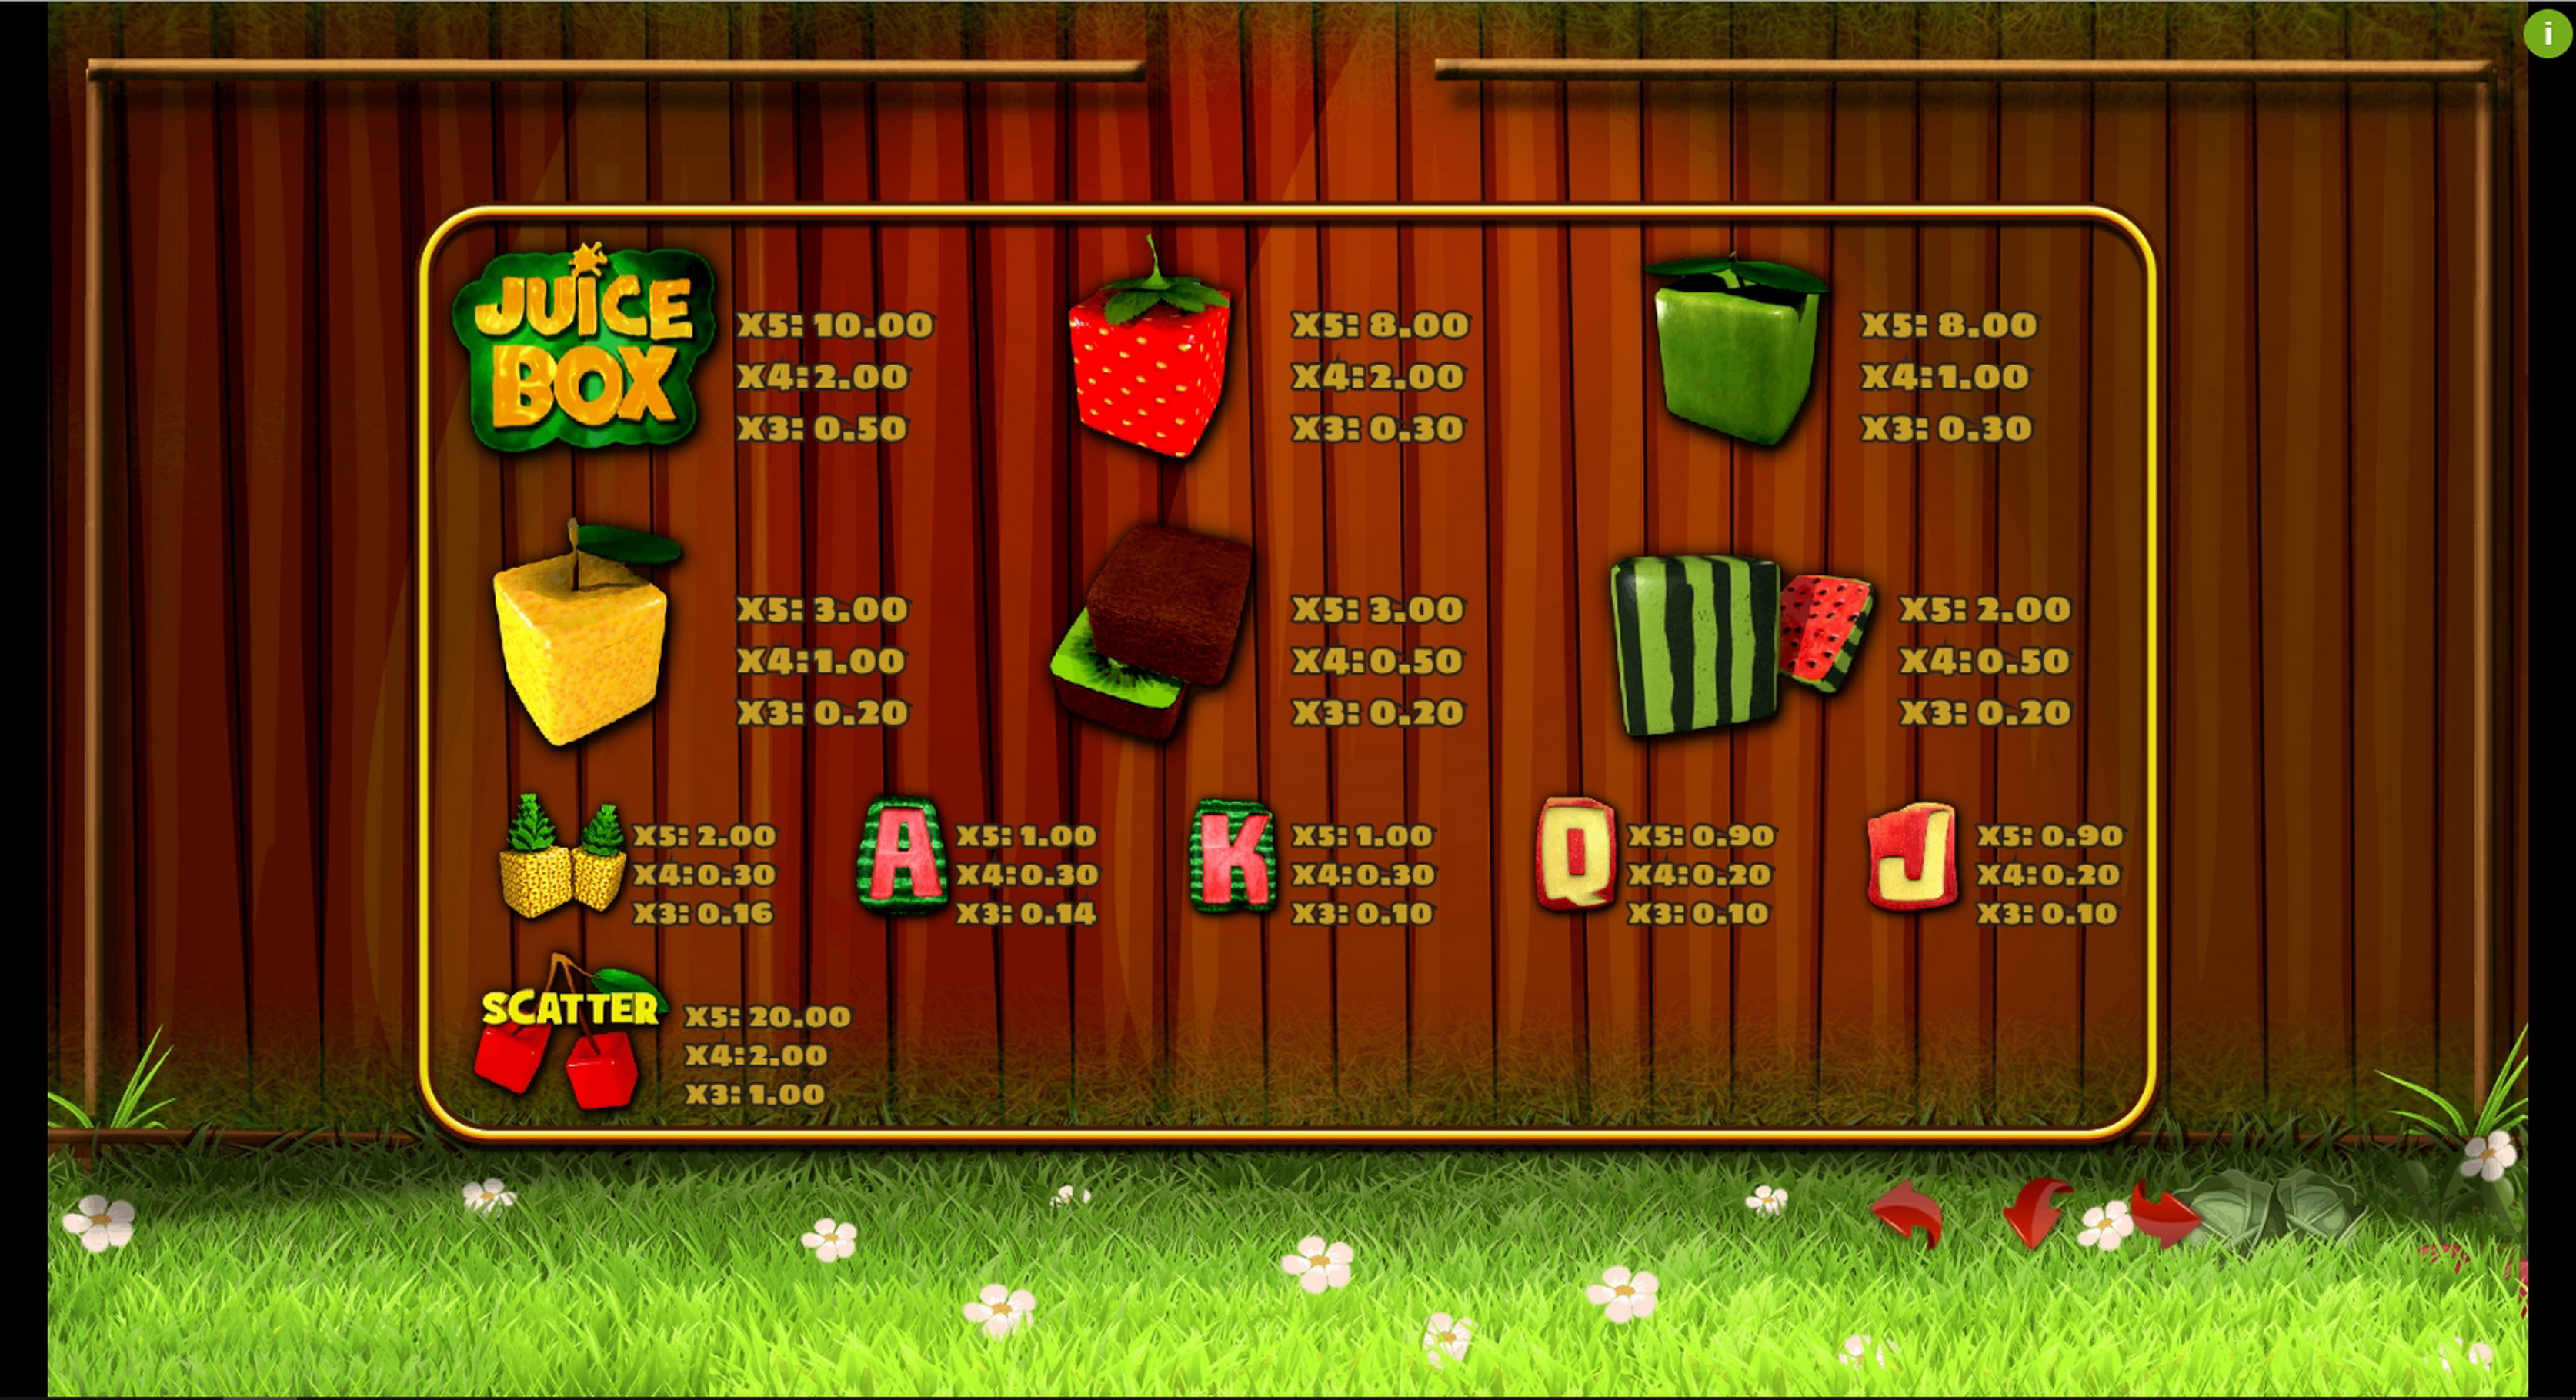 Info of Juice Box Slot Game by PlayPearls